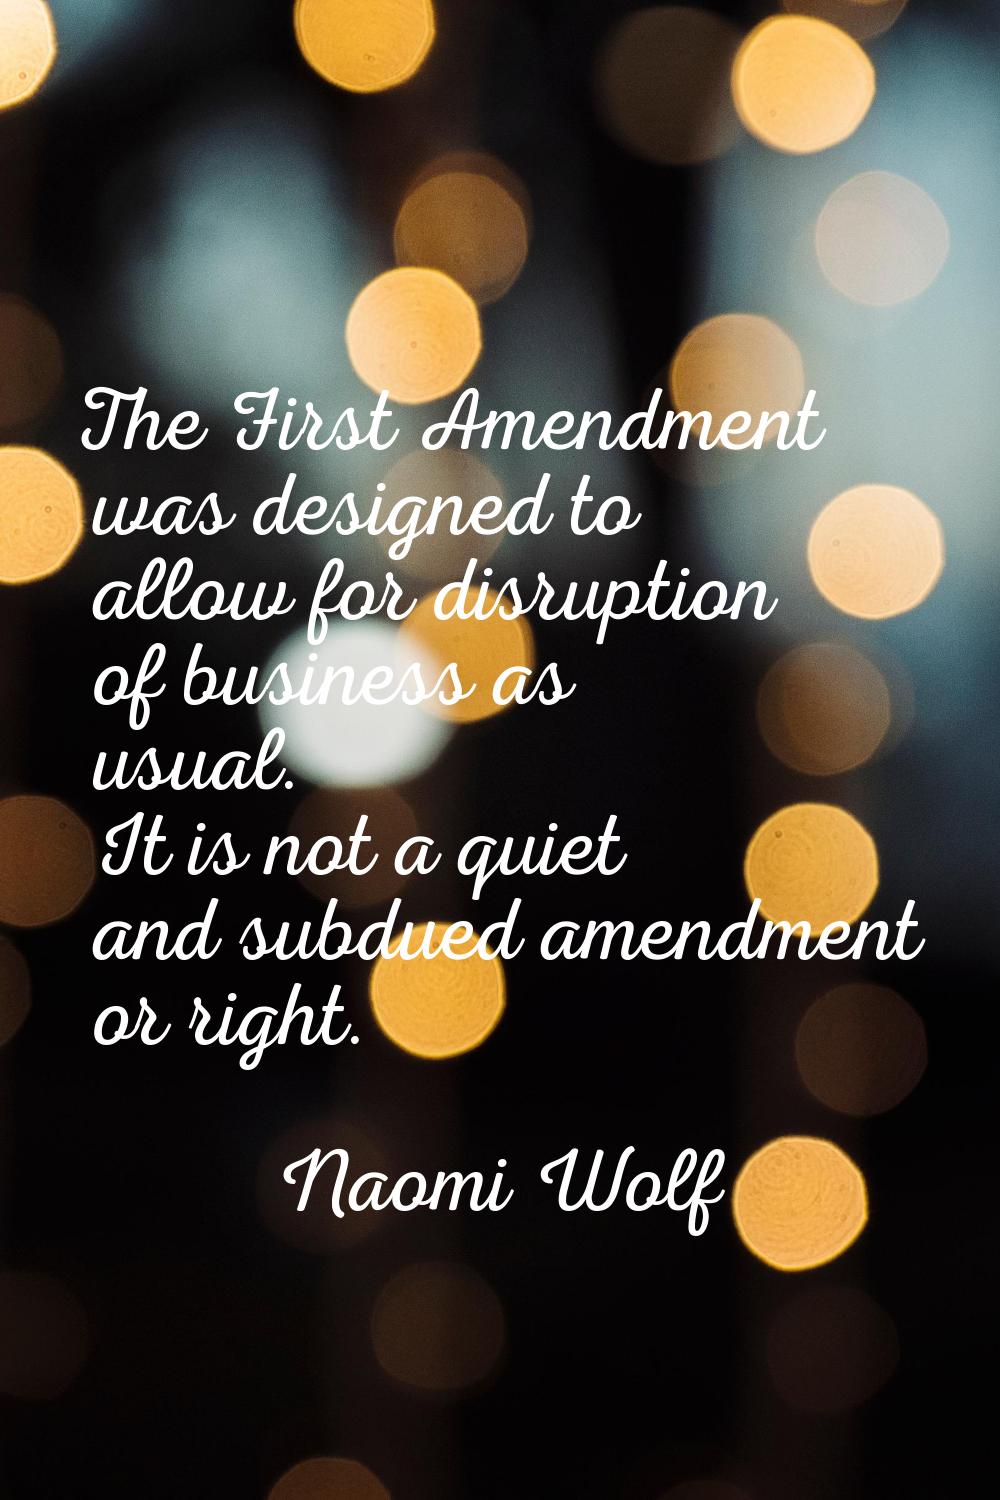 The First Amendment was designed to allow for disruption of business as usual. It is not a quiet an